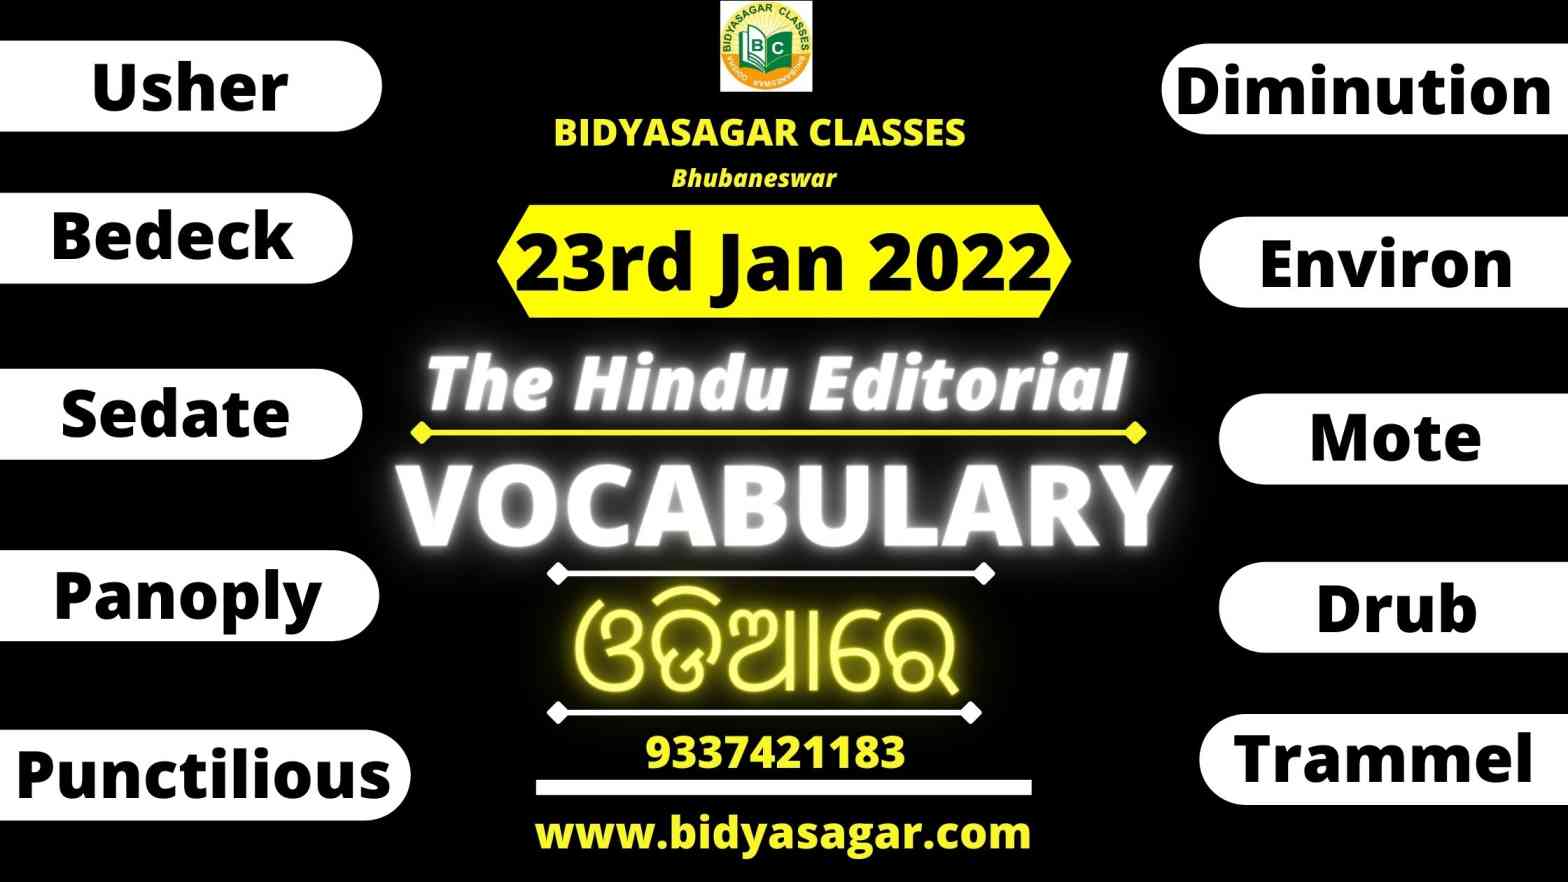 The Hindu Editorial Vocabulary of 23rd January 2022